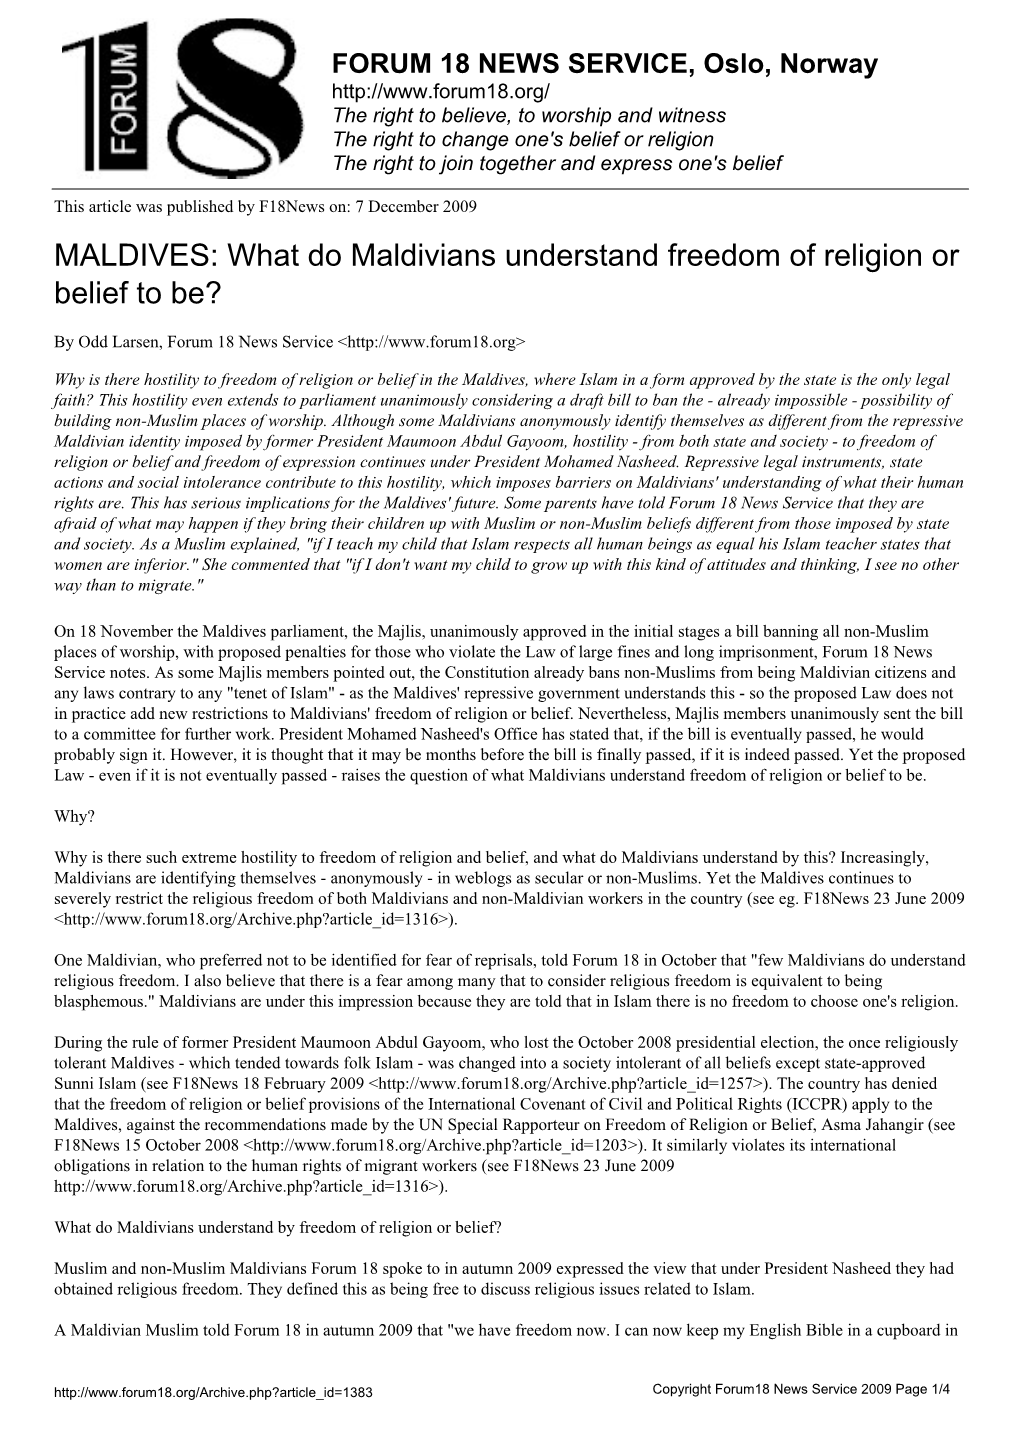 MALDIVES: What Do Maldivians Understand Freedom of Religion Or Belief to Be?